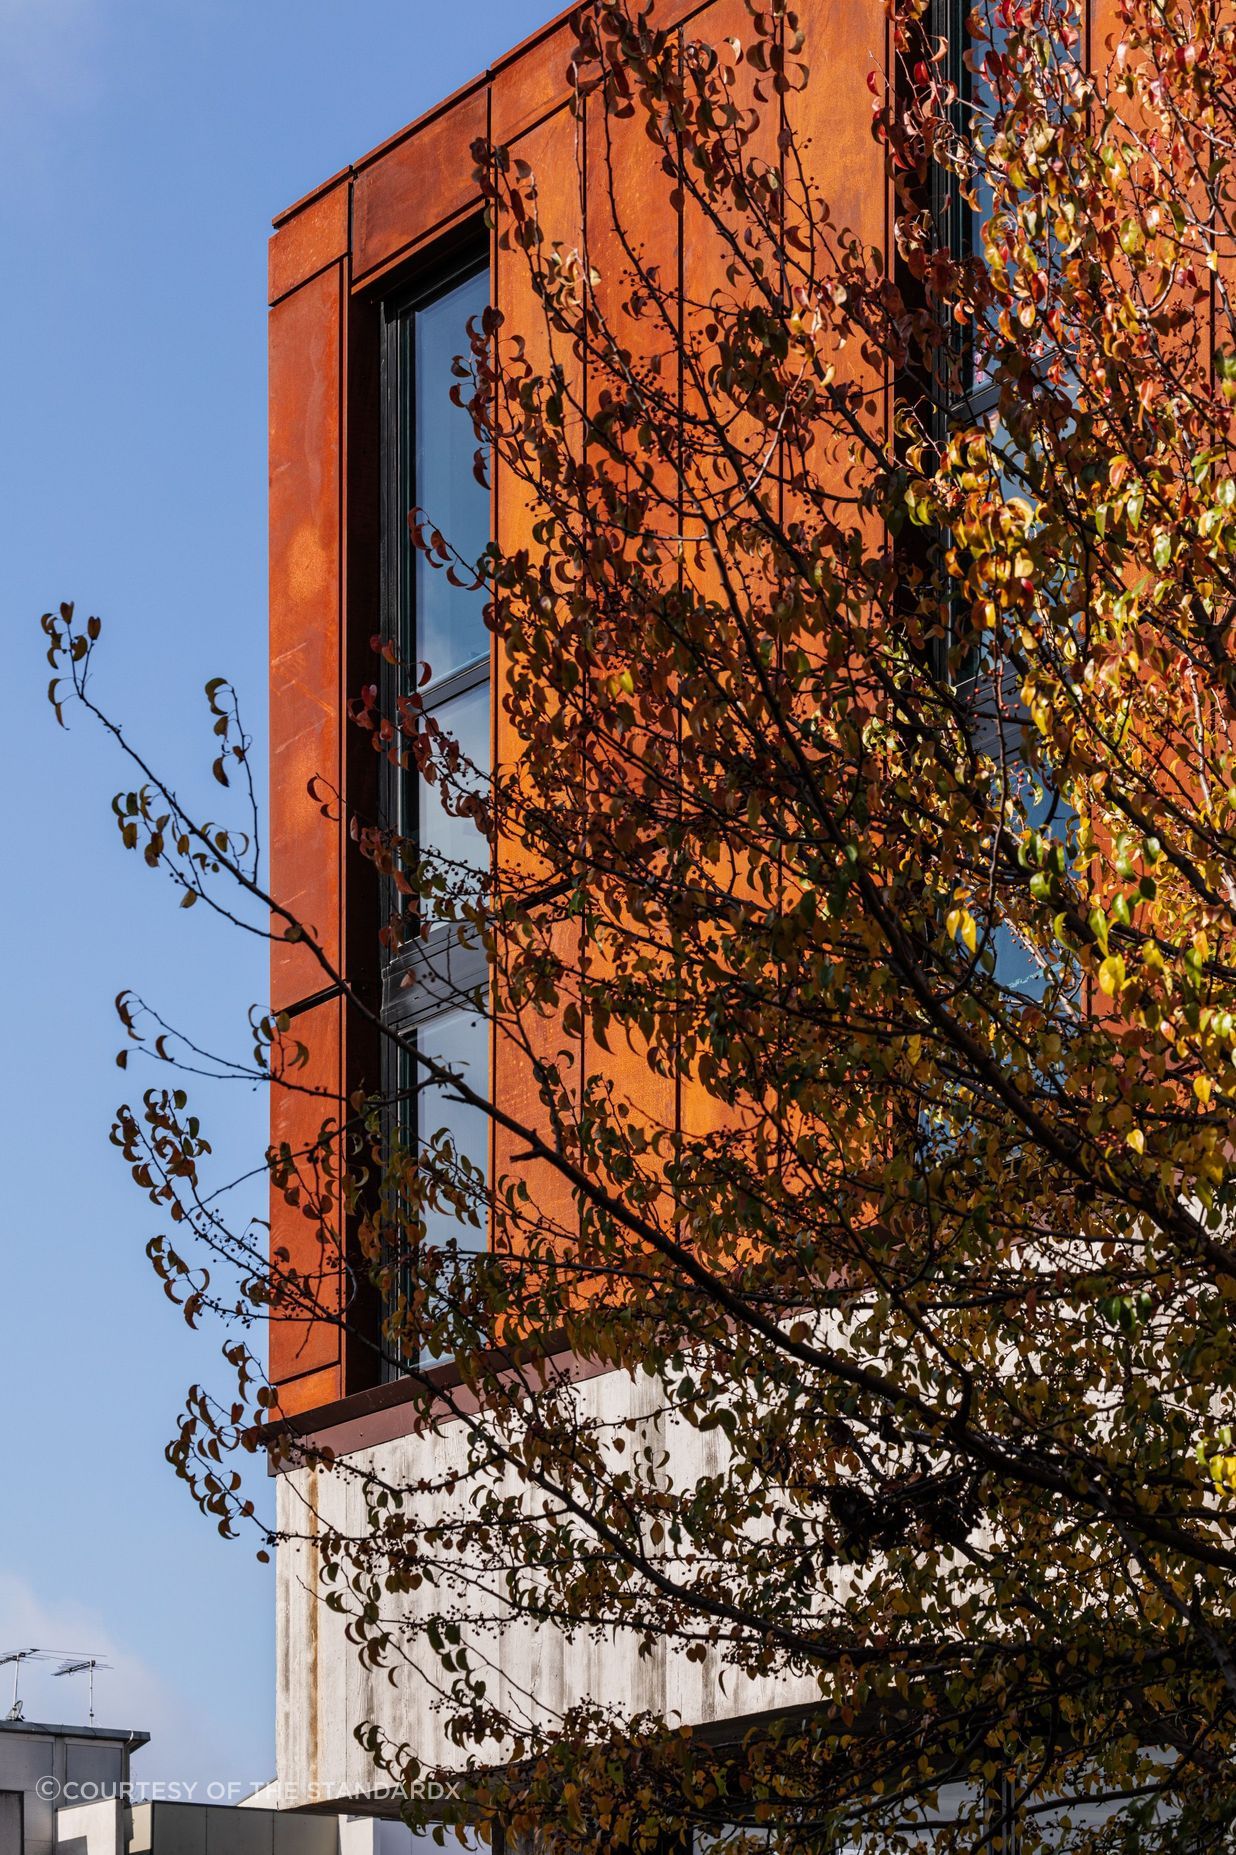 Its sturdy, stacked form and weathering steel facade echo the area's industrial roots.